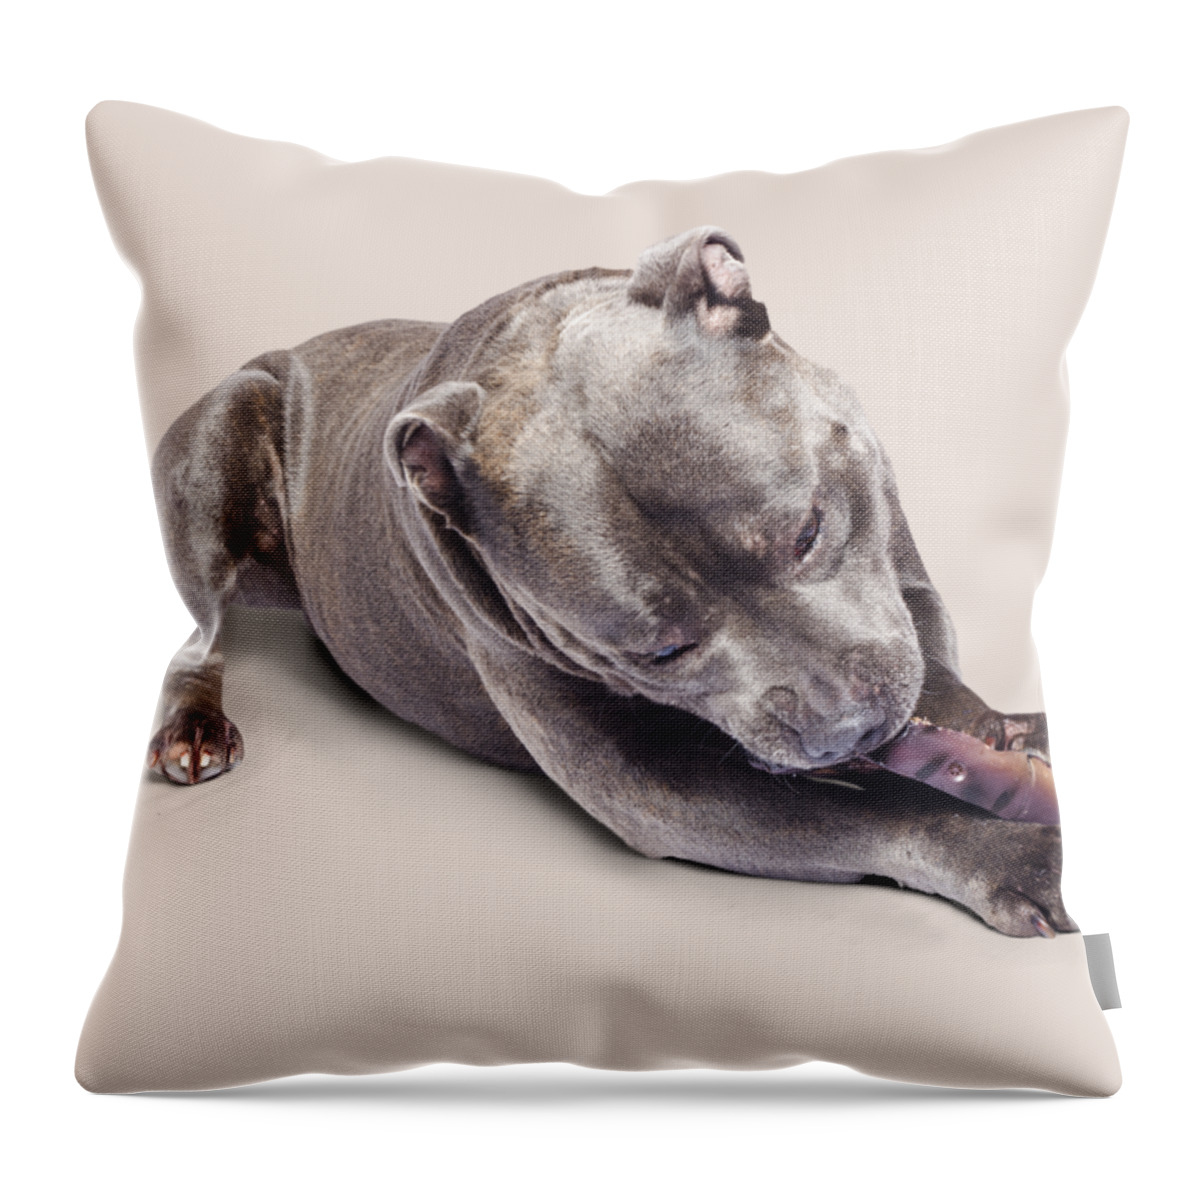 Pets Throw Pillow featuring the photograph Dog eating chew toy by Jorgo Photography